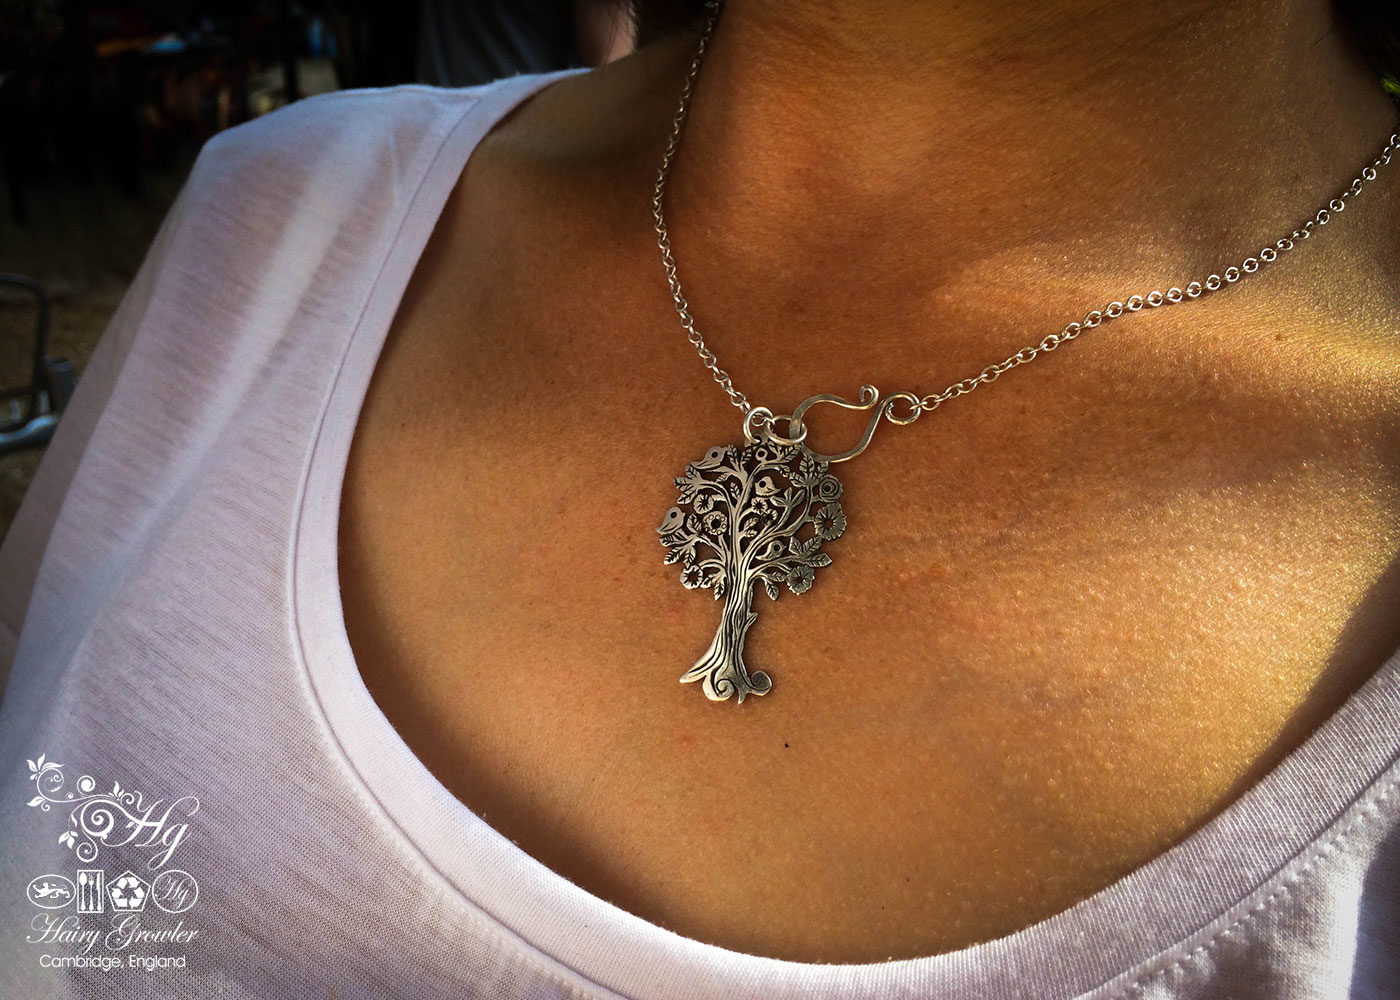 Handmade and repurposed silver Summer tree and tweeting birds made from a silver coin